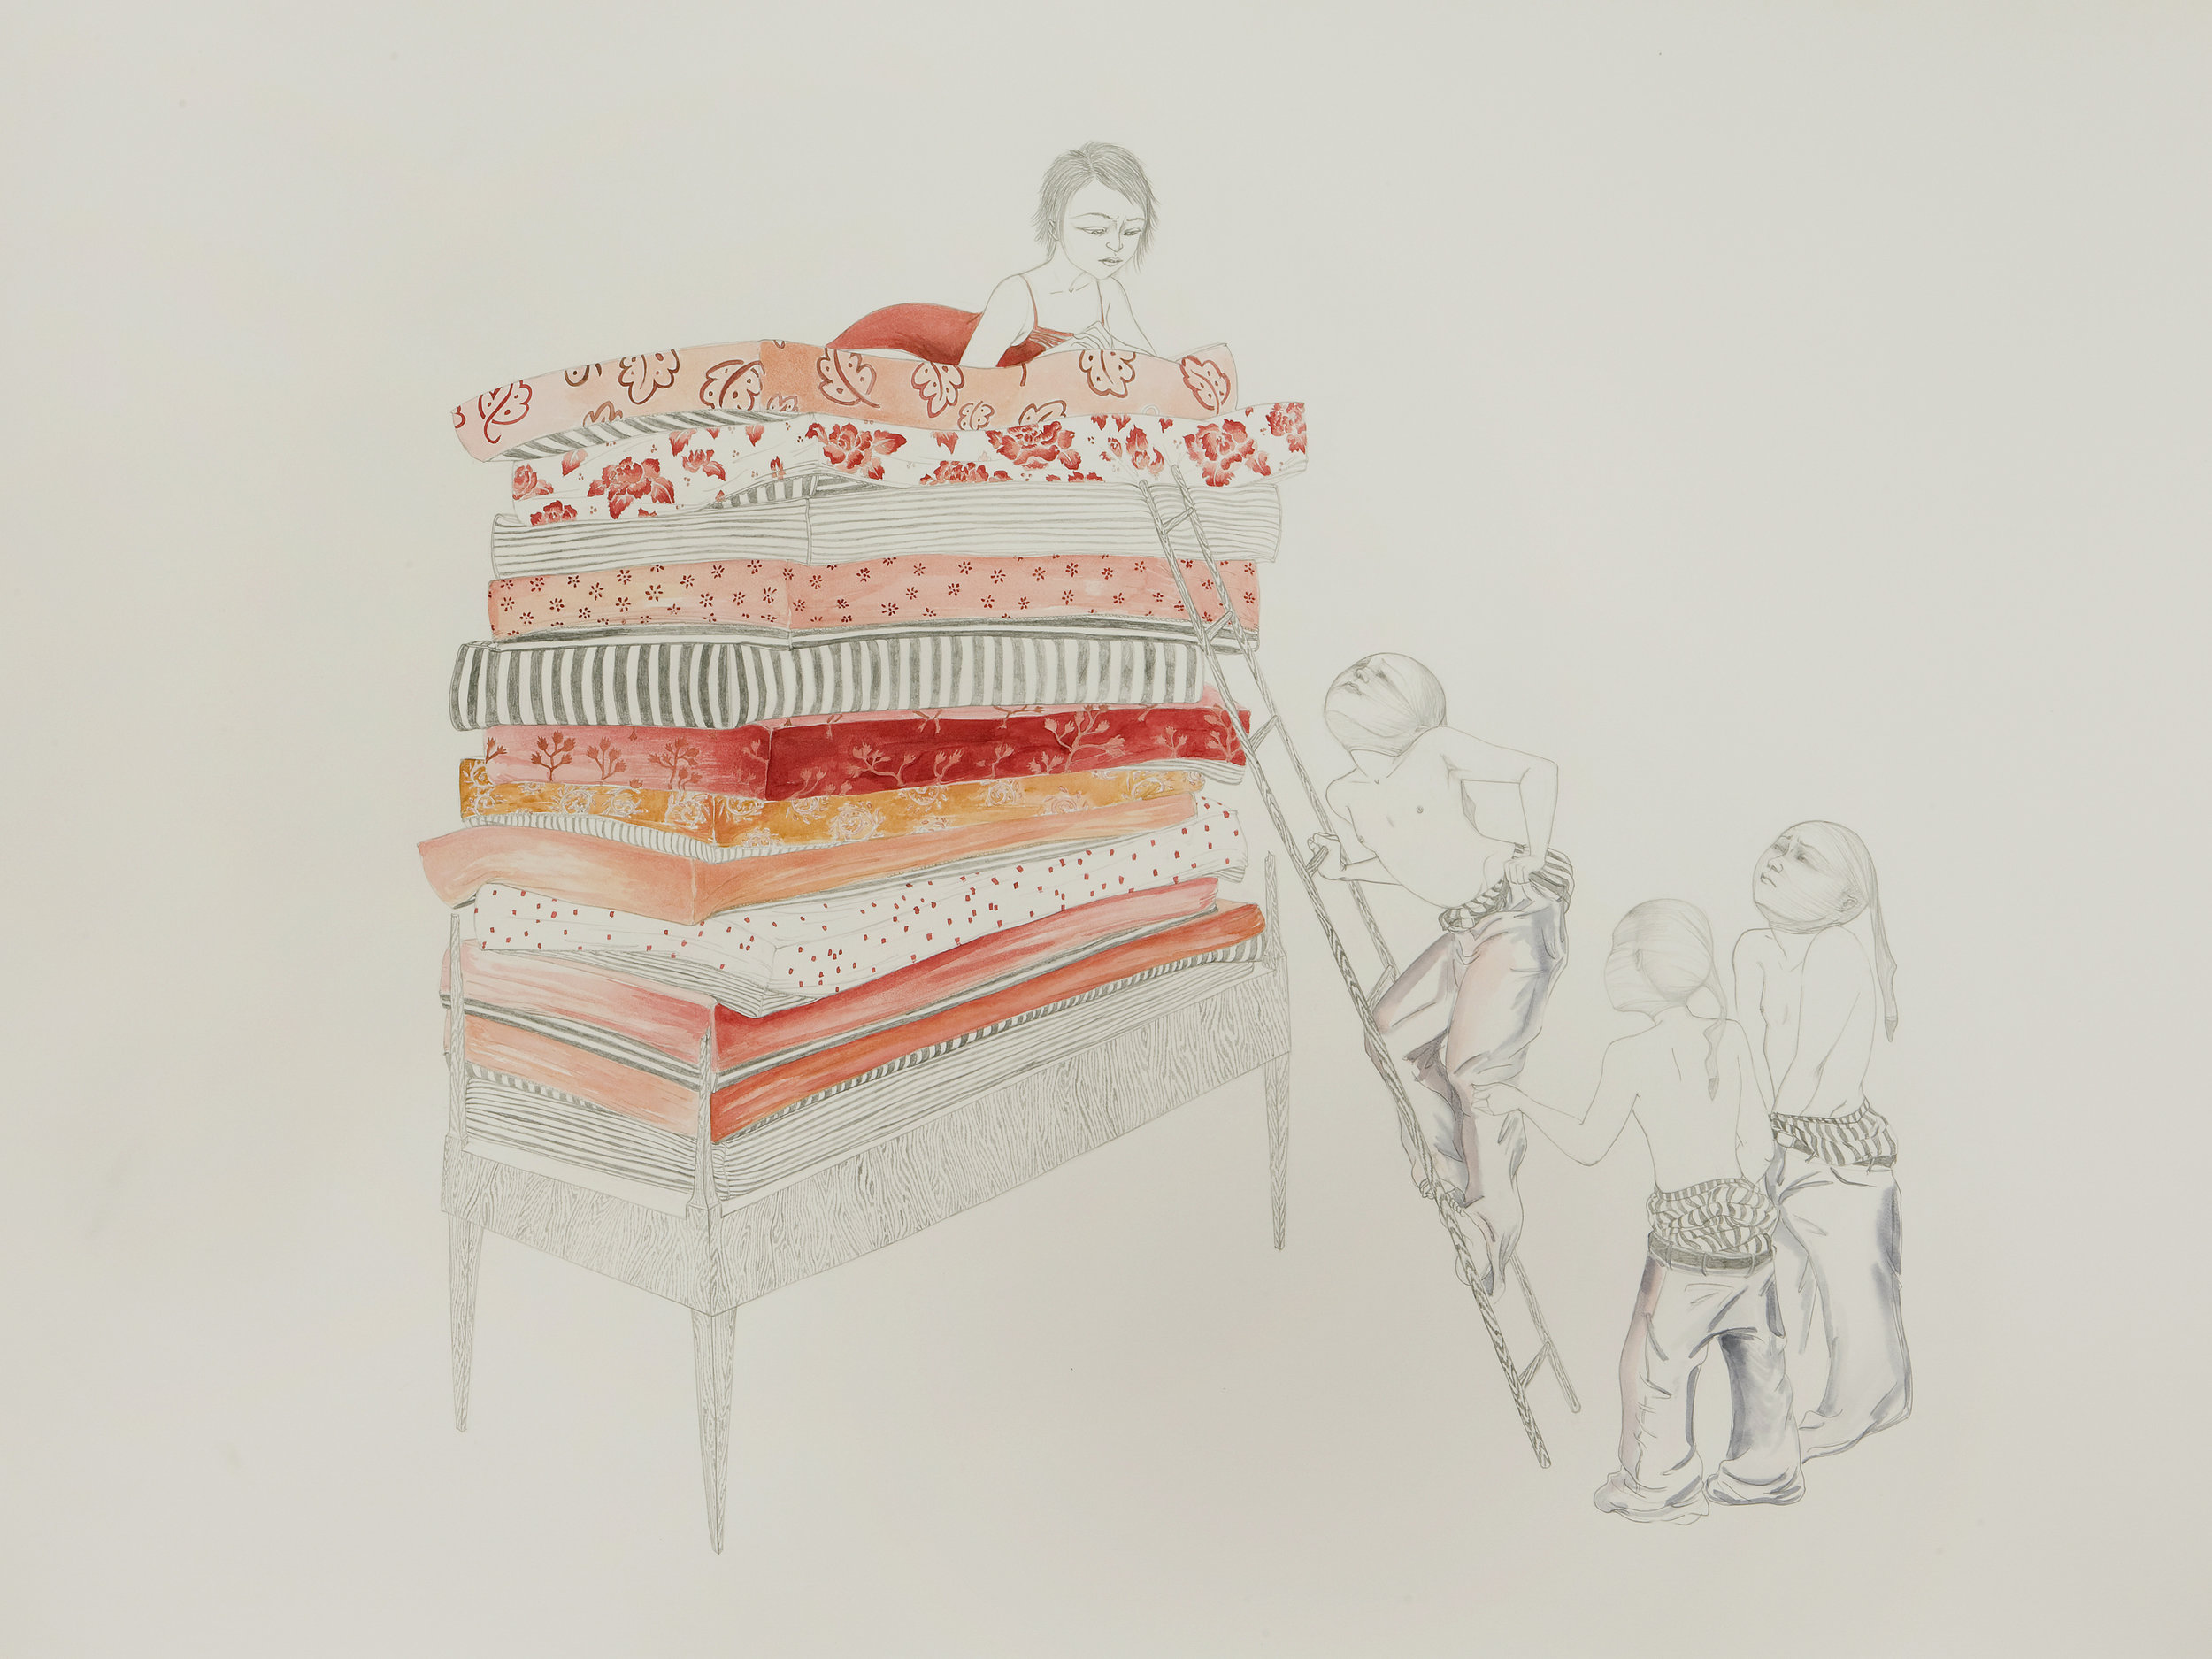   Come To Bed , 2009 Graphite, ink, watercolor on paper 38 X 50 inches&nbsp;  